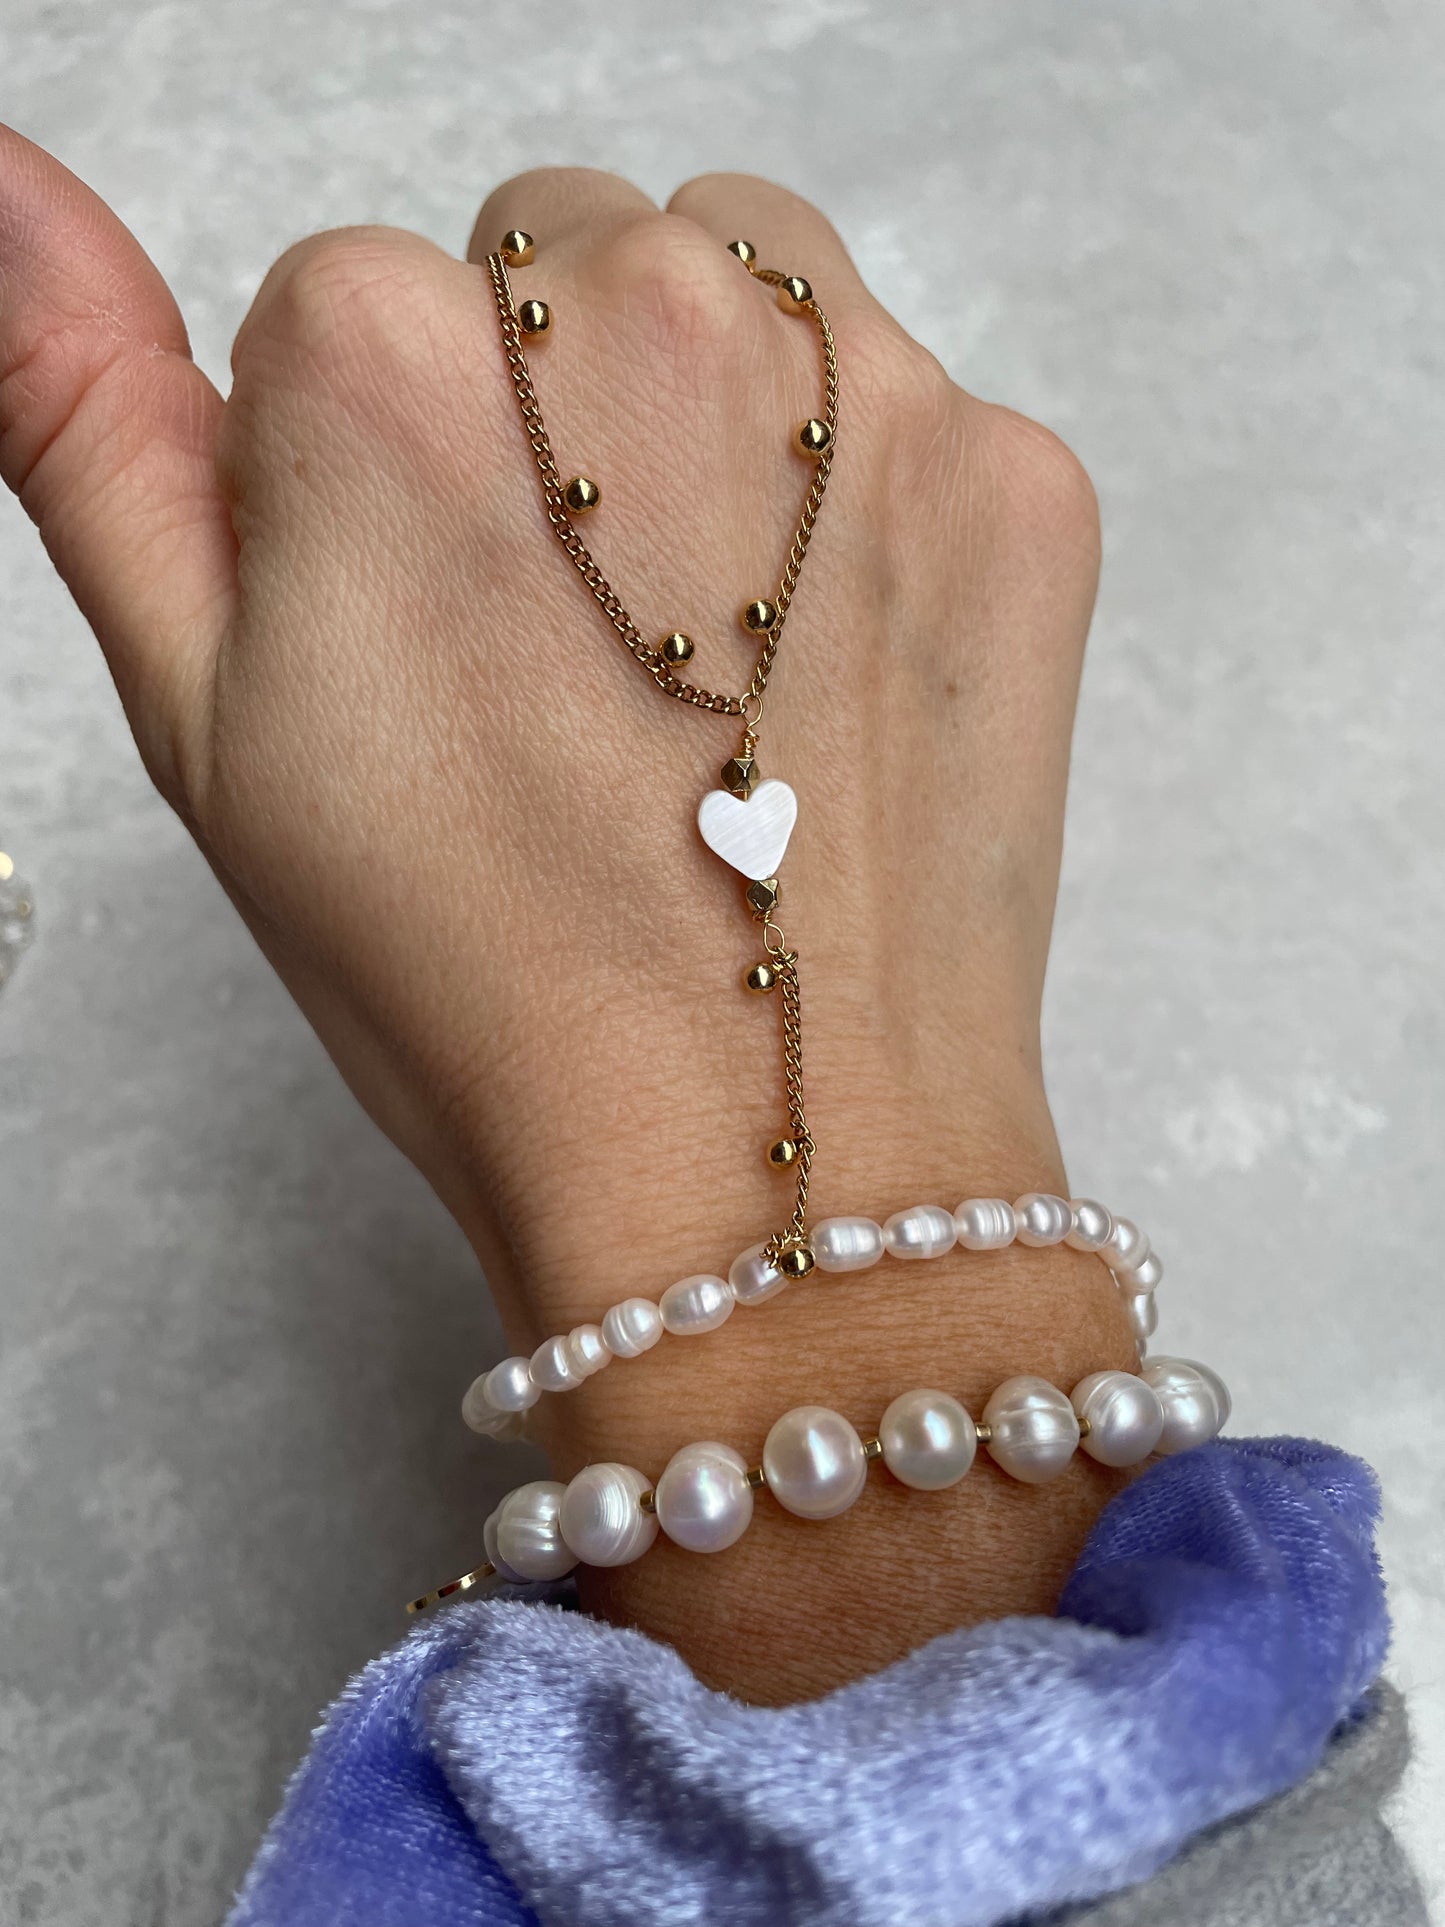 Mother of pearl hand jewelry